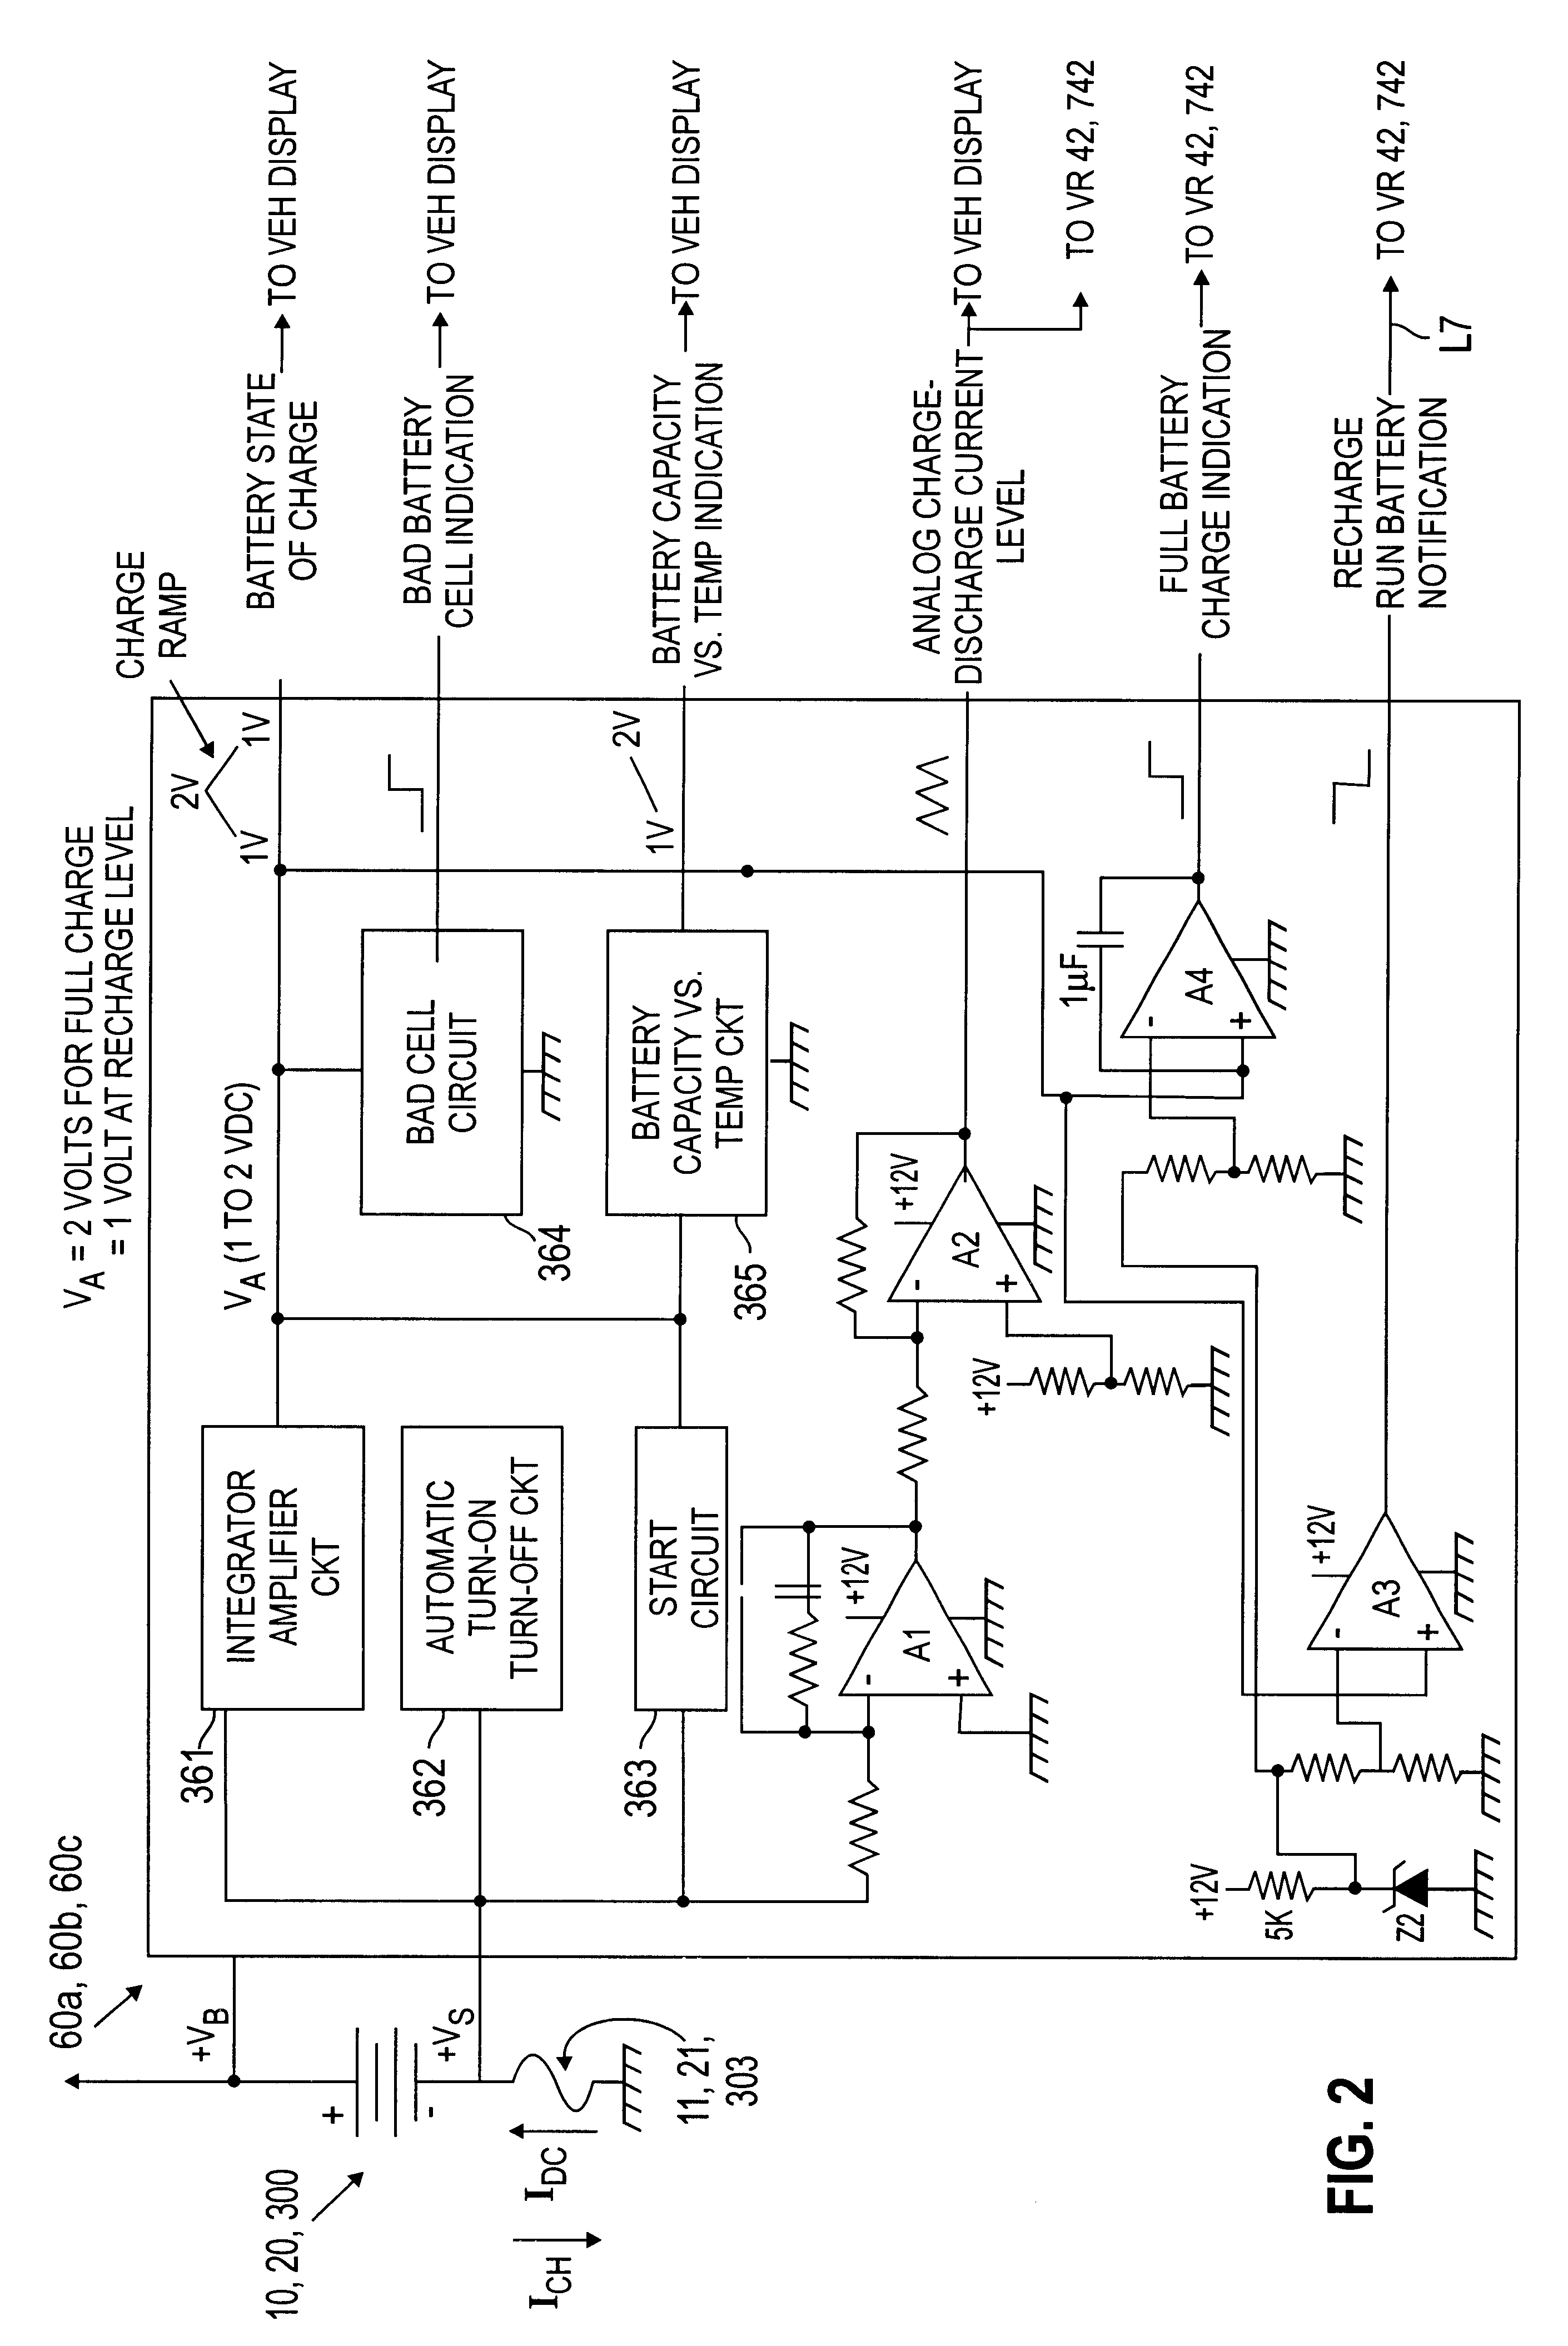 Multi-battery fuel saving and emission reduction system for automotive vehicles